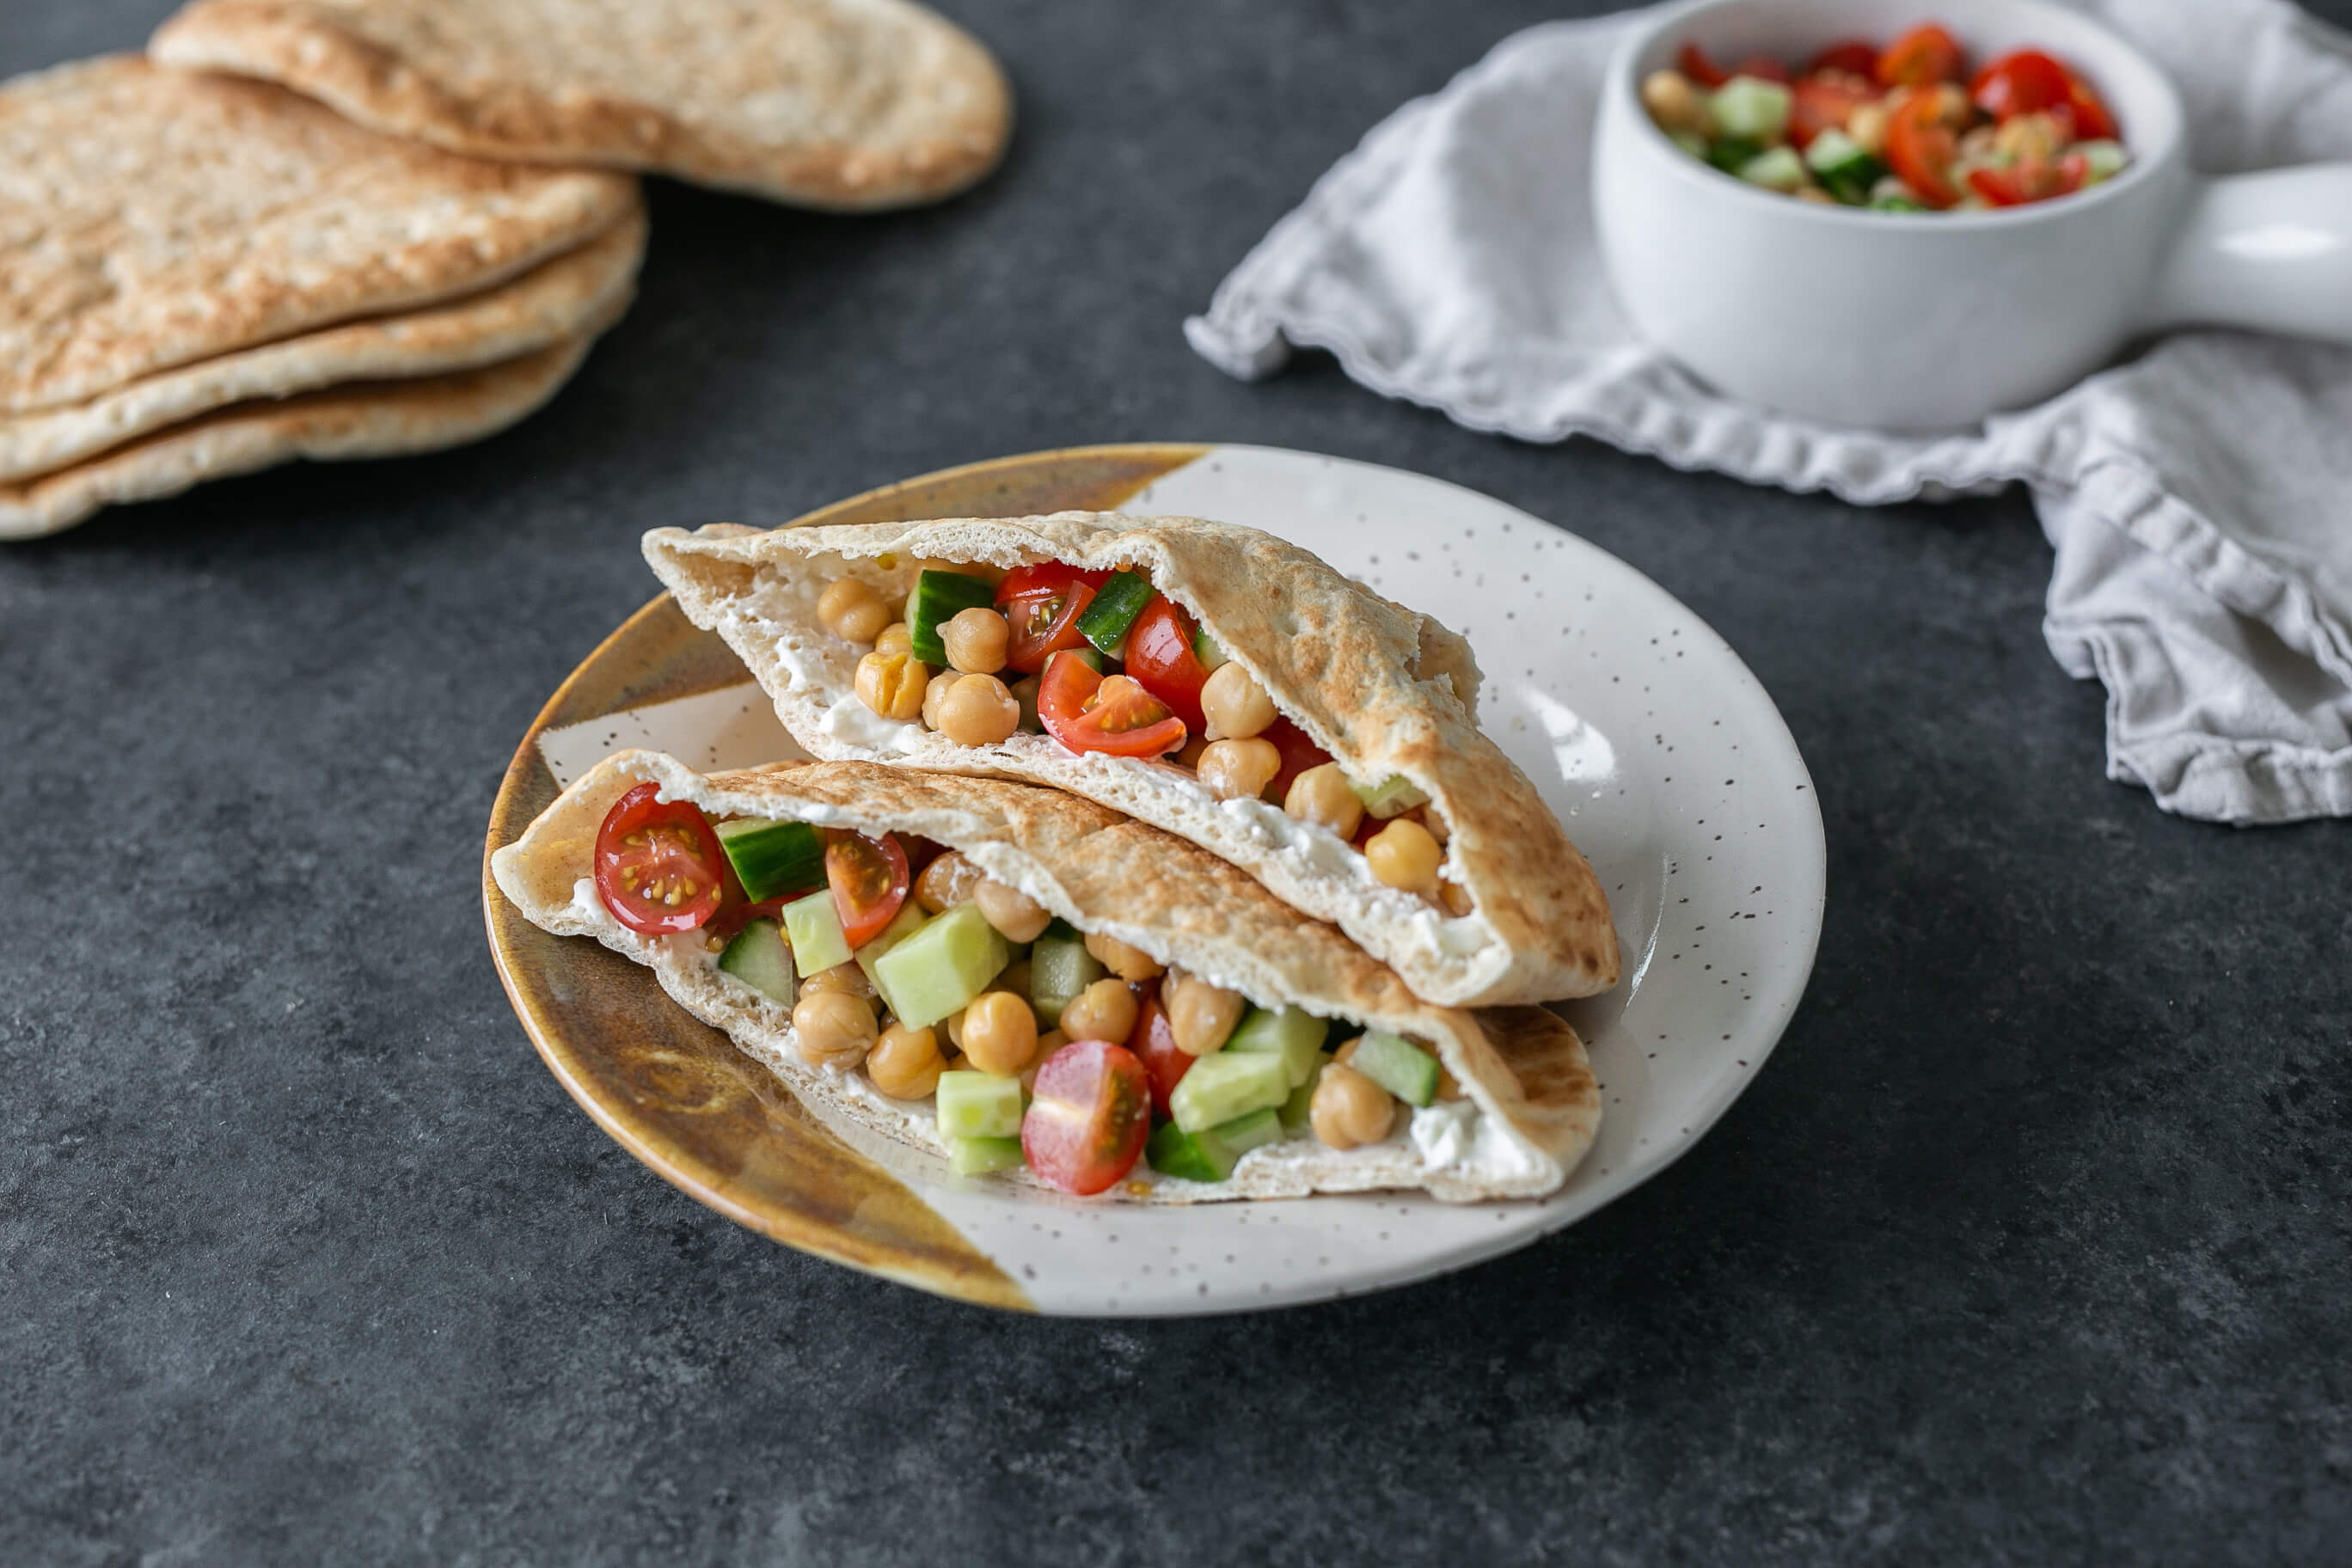 Healthy $4 Dinners to Add to Your Client's Meal Plan: Chopped Salad Pitas